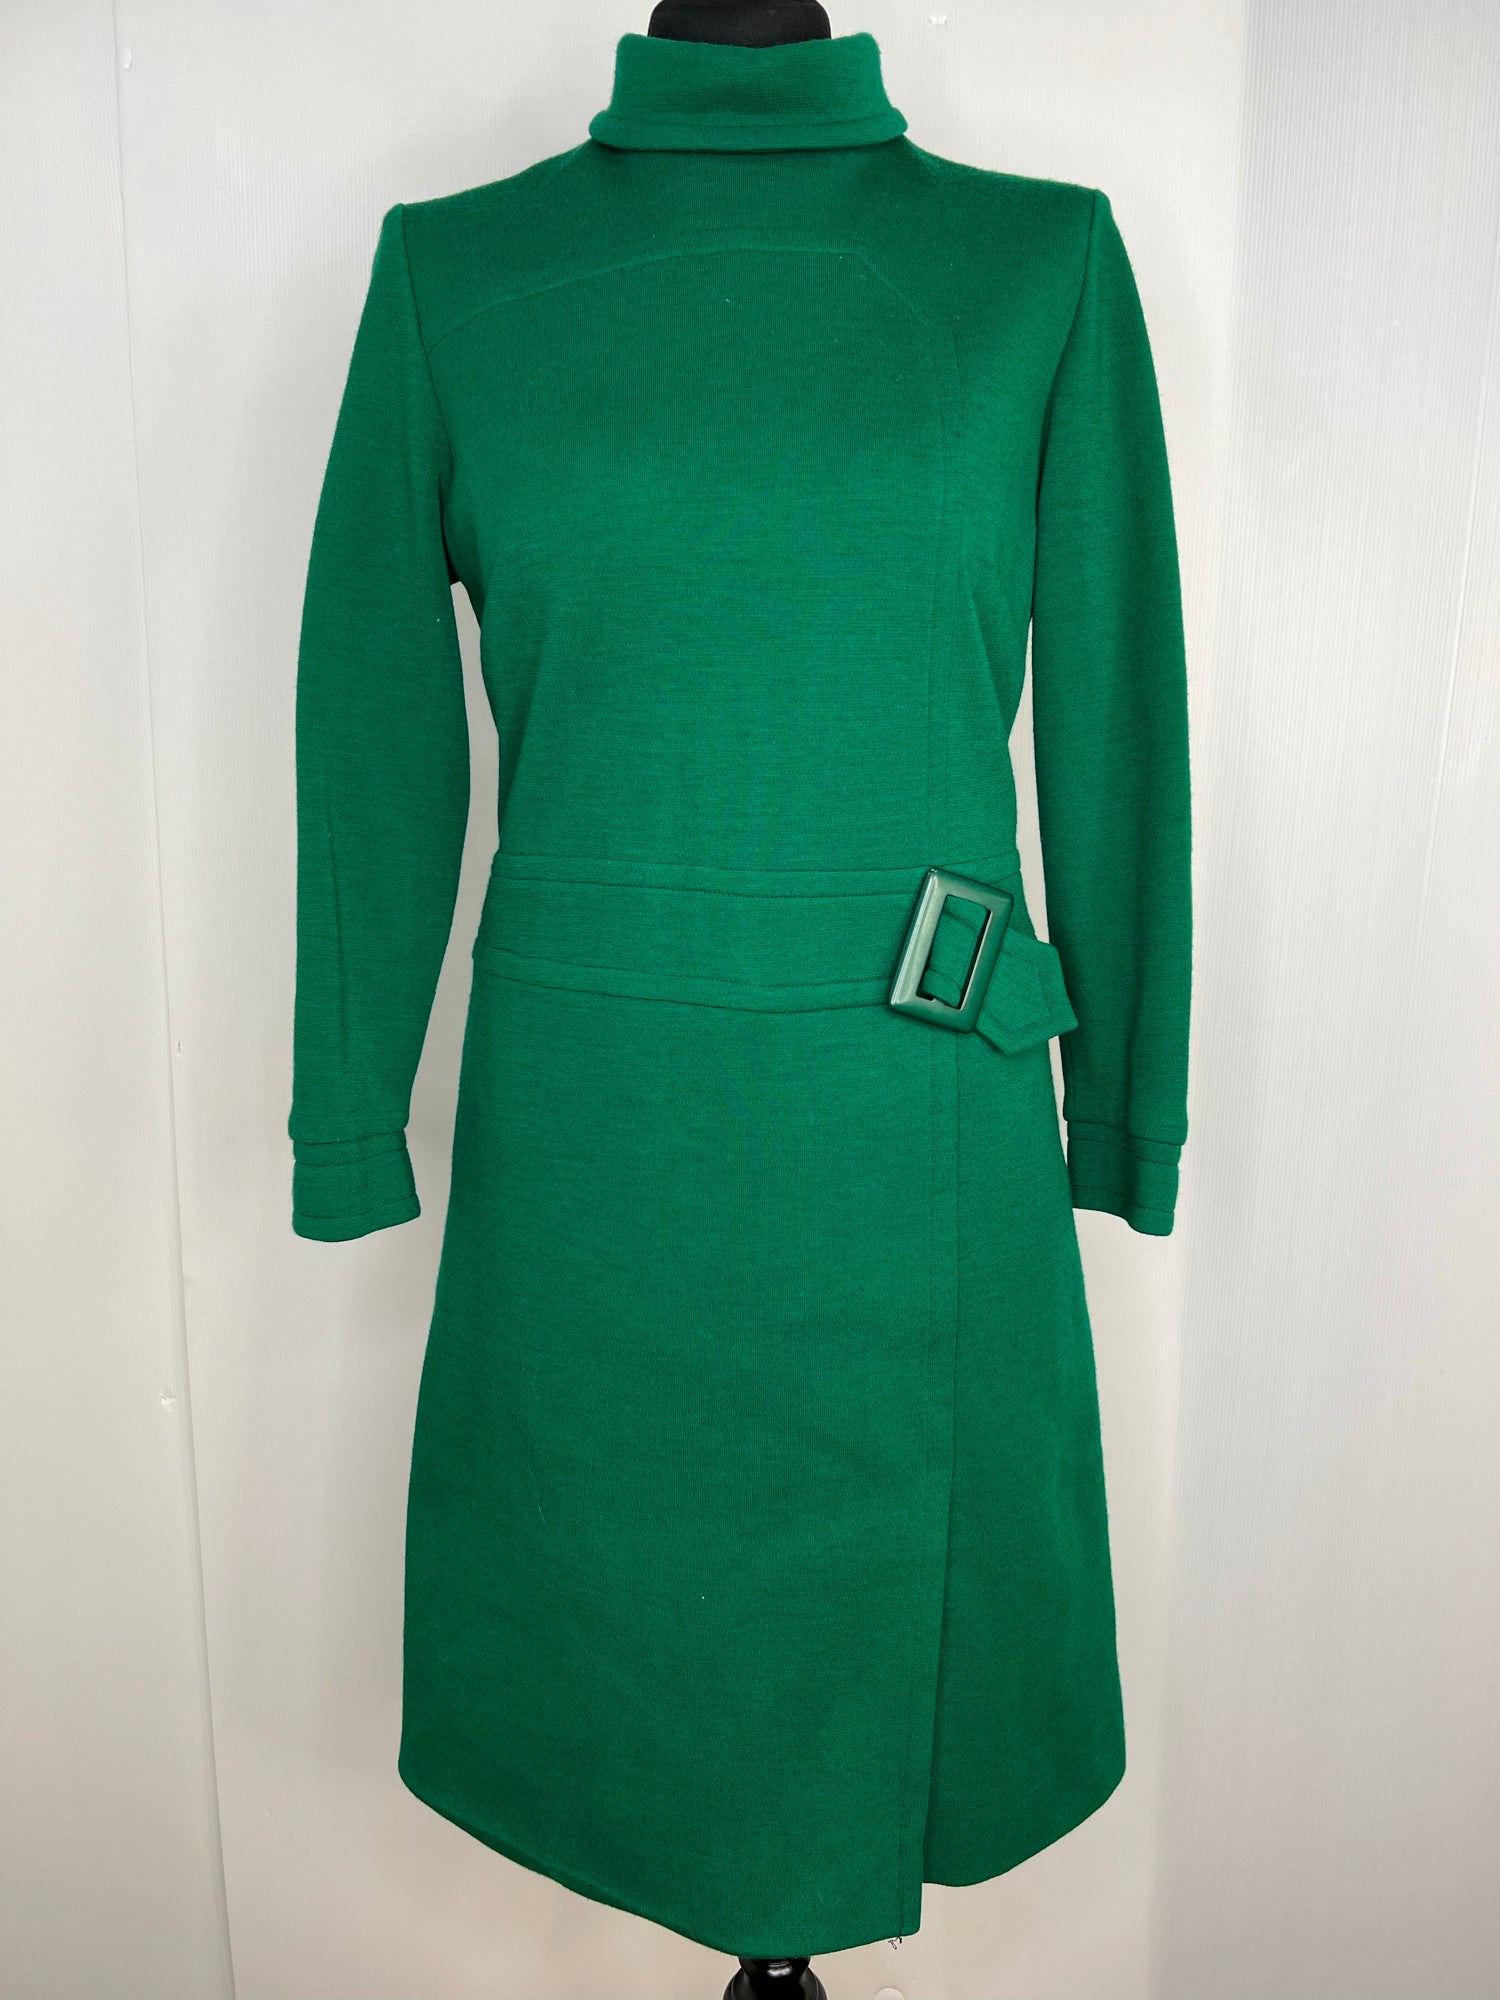 Vintage 1960s Roll Neck Long Sleeve Mod Dress in Green by David Gibson - Size UK 12